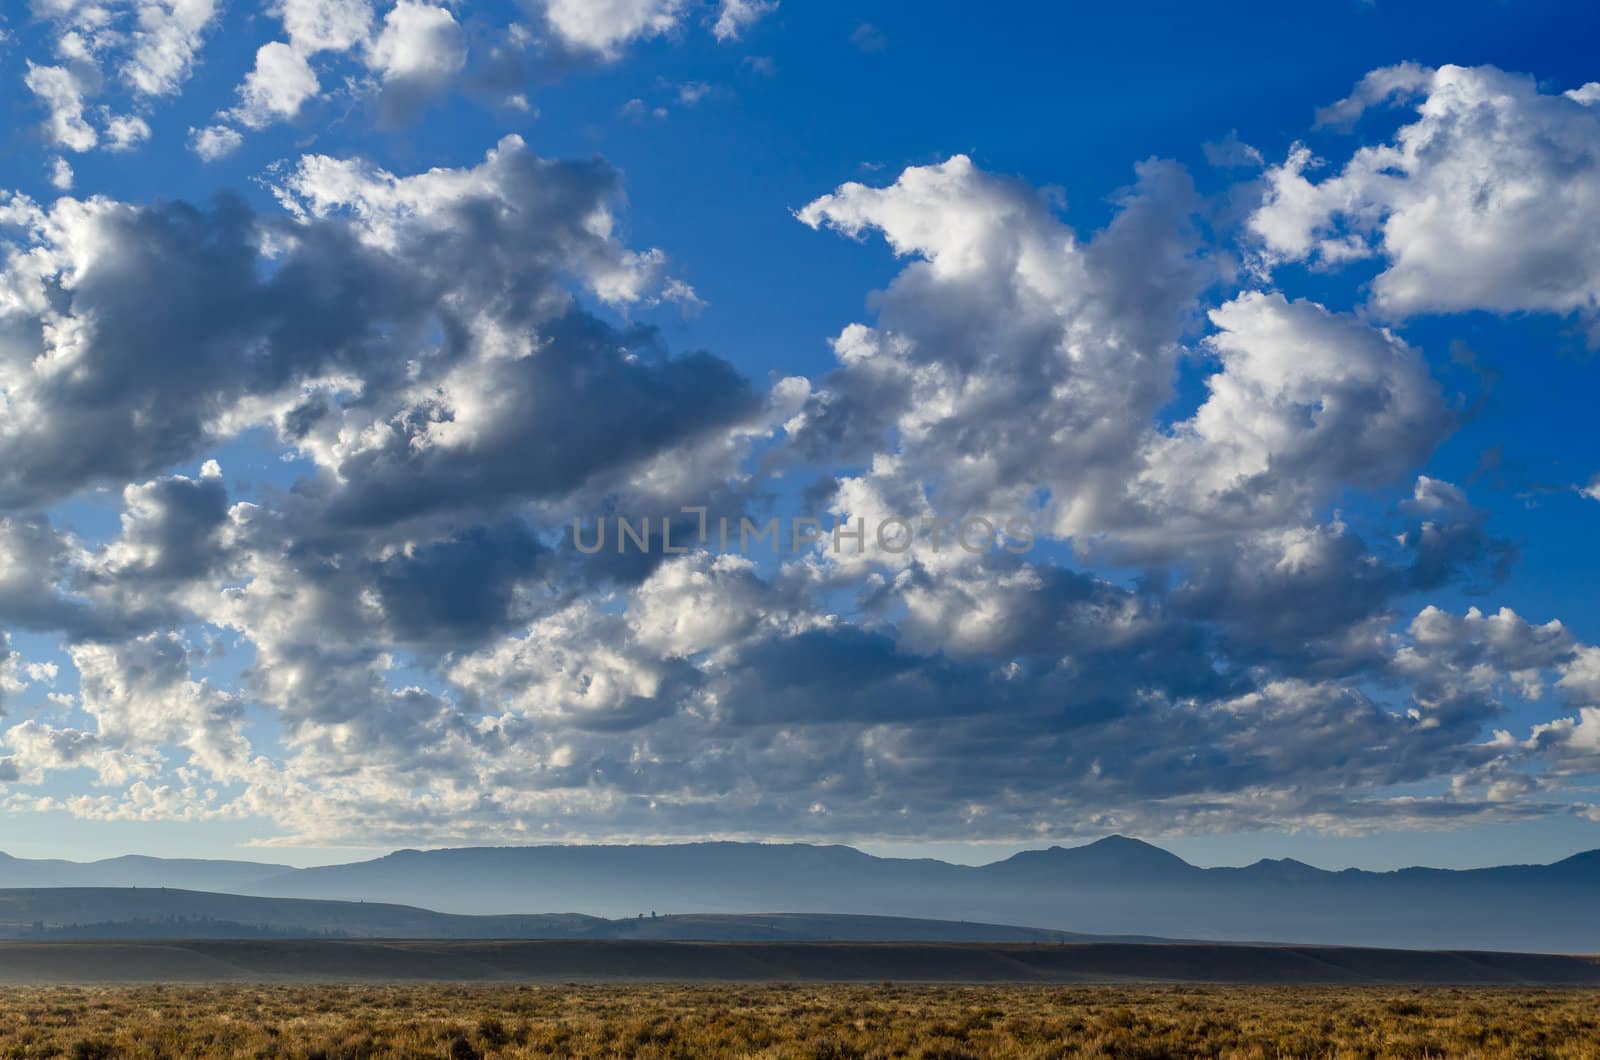 Sagebrush flats, the Gros Ventre Mountains and a sky full of clouds in early morning light, Grand Teton National Park, Wyoming, USA by CharlesBolin